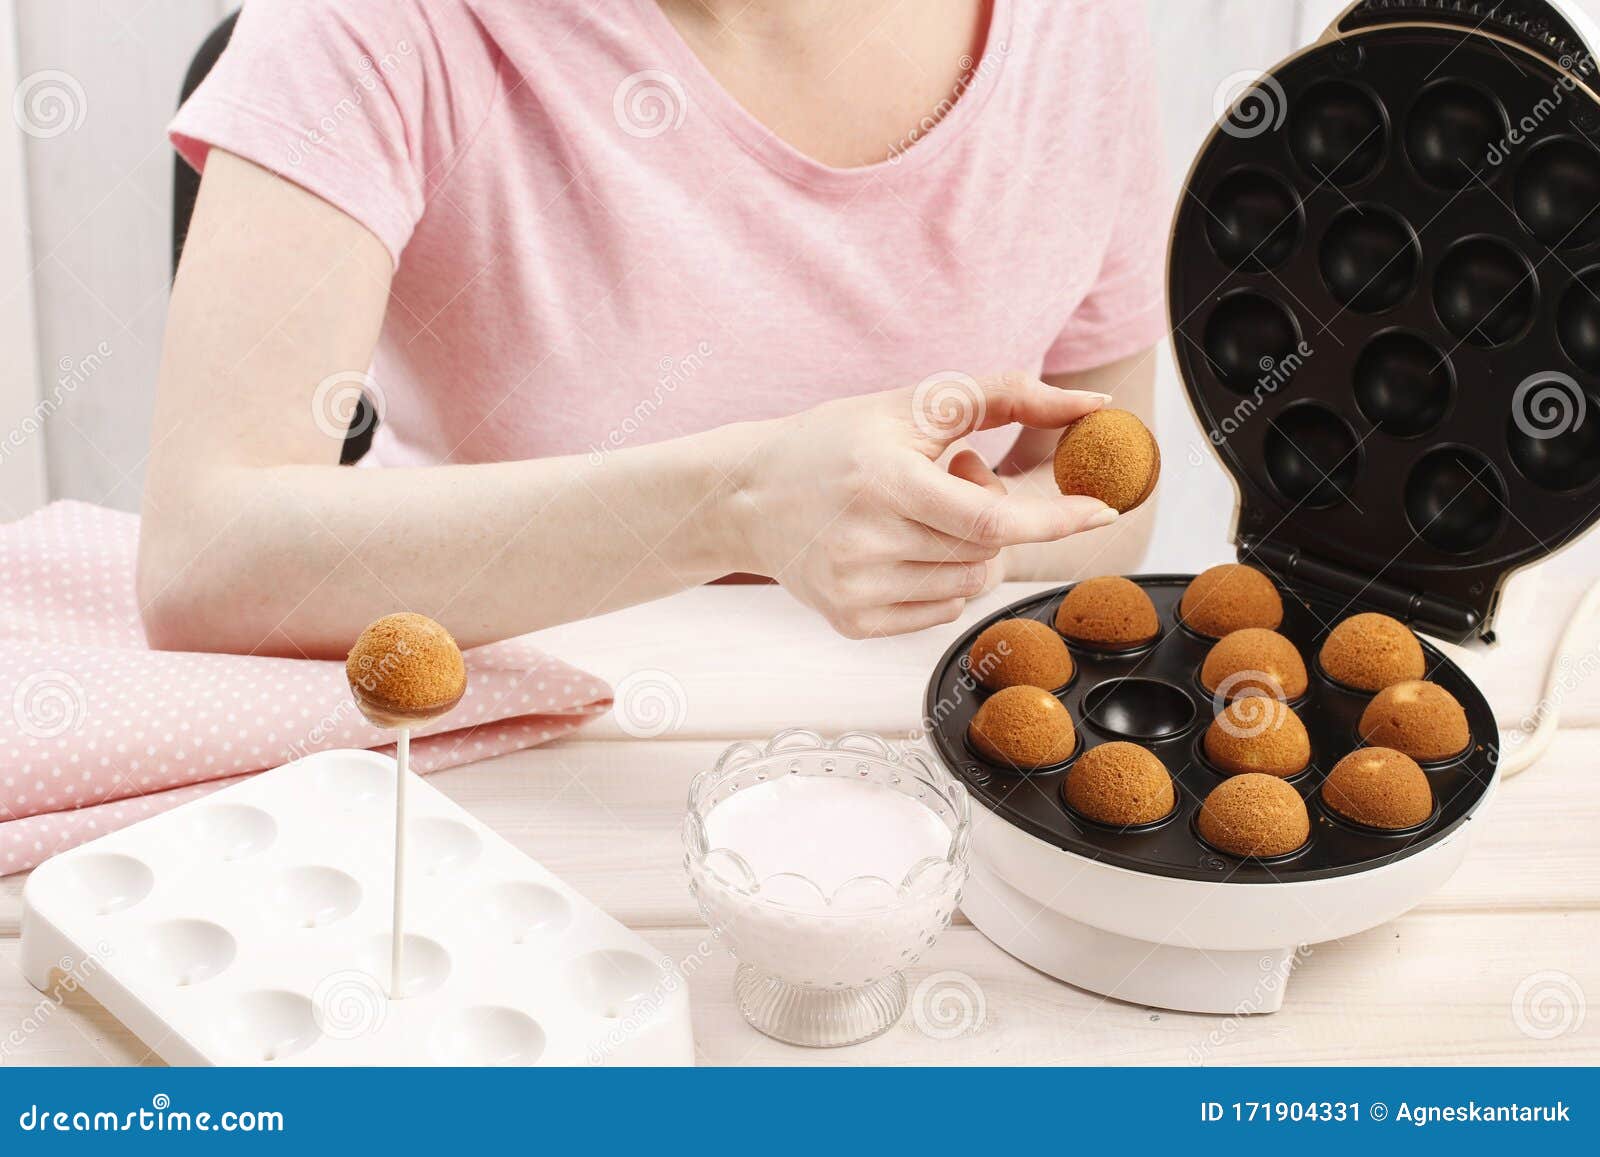 How To Make Cake Pops Step By Step With Pictures